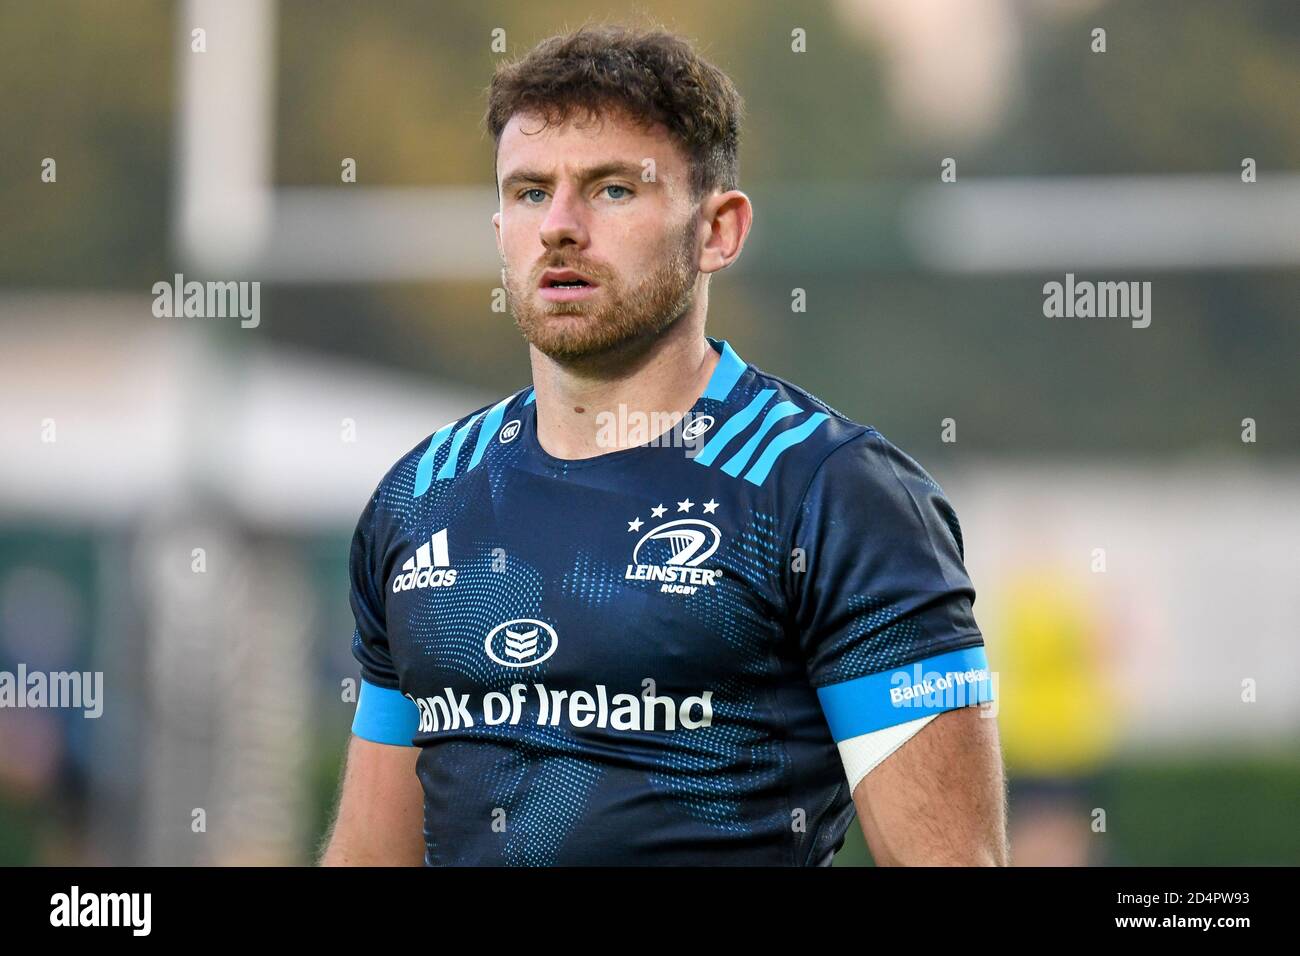 Monigo Stadium, Treviso, Italy, 10 Oct 2020, Hugo Keenan (Leinster) during  Benetton Treviso vs Leinster Rugby, Rugby Guinness Pro 14 - Credit:  LM/Ettore Griffoni/Alamy Live News Stock Photo - Alamy